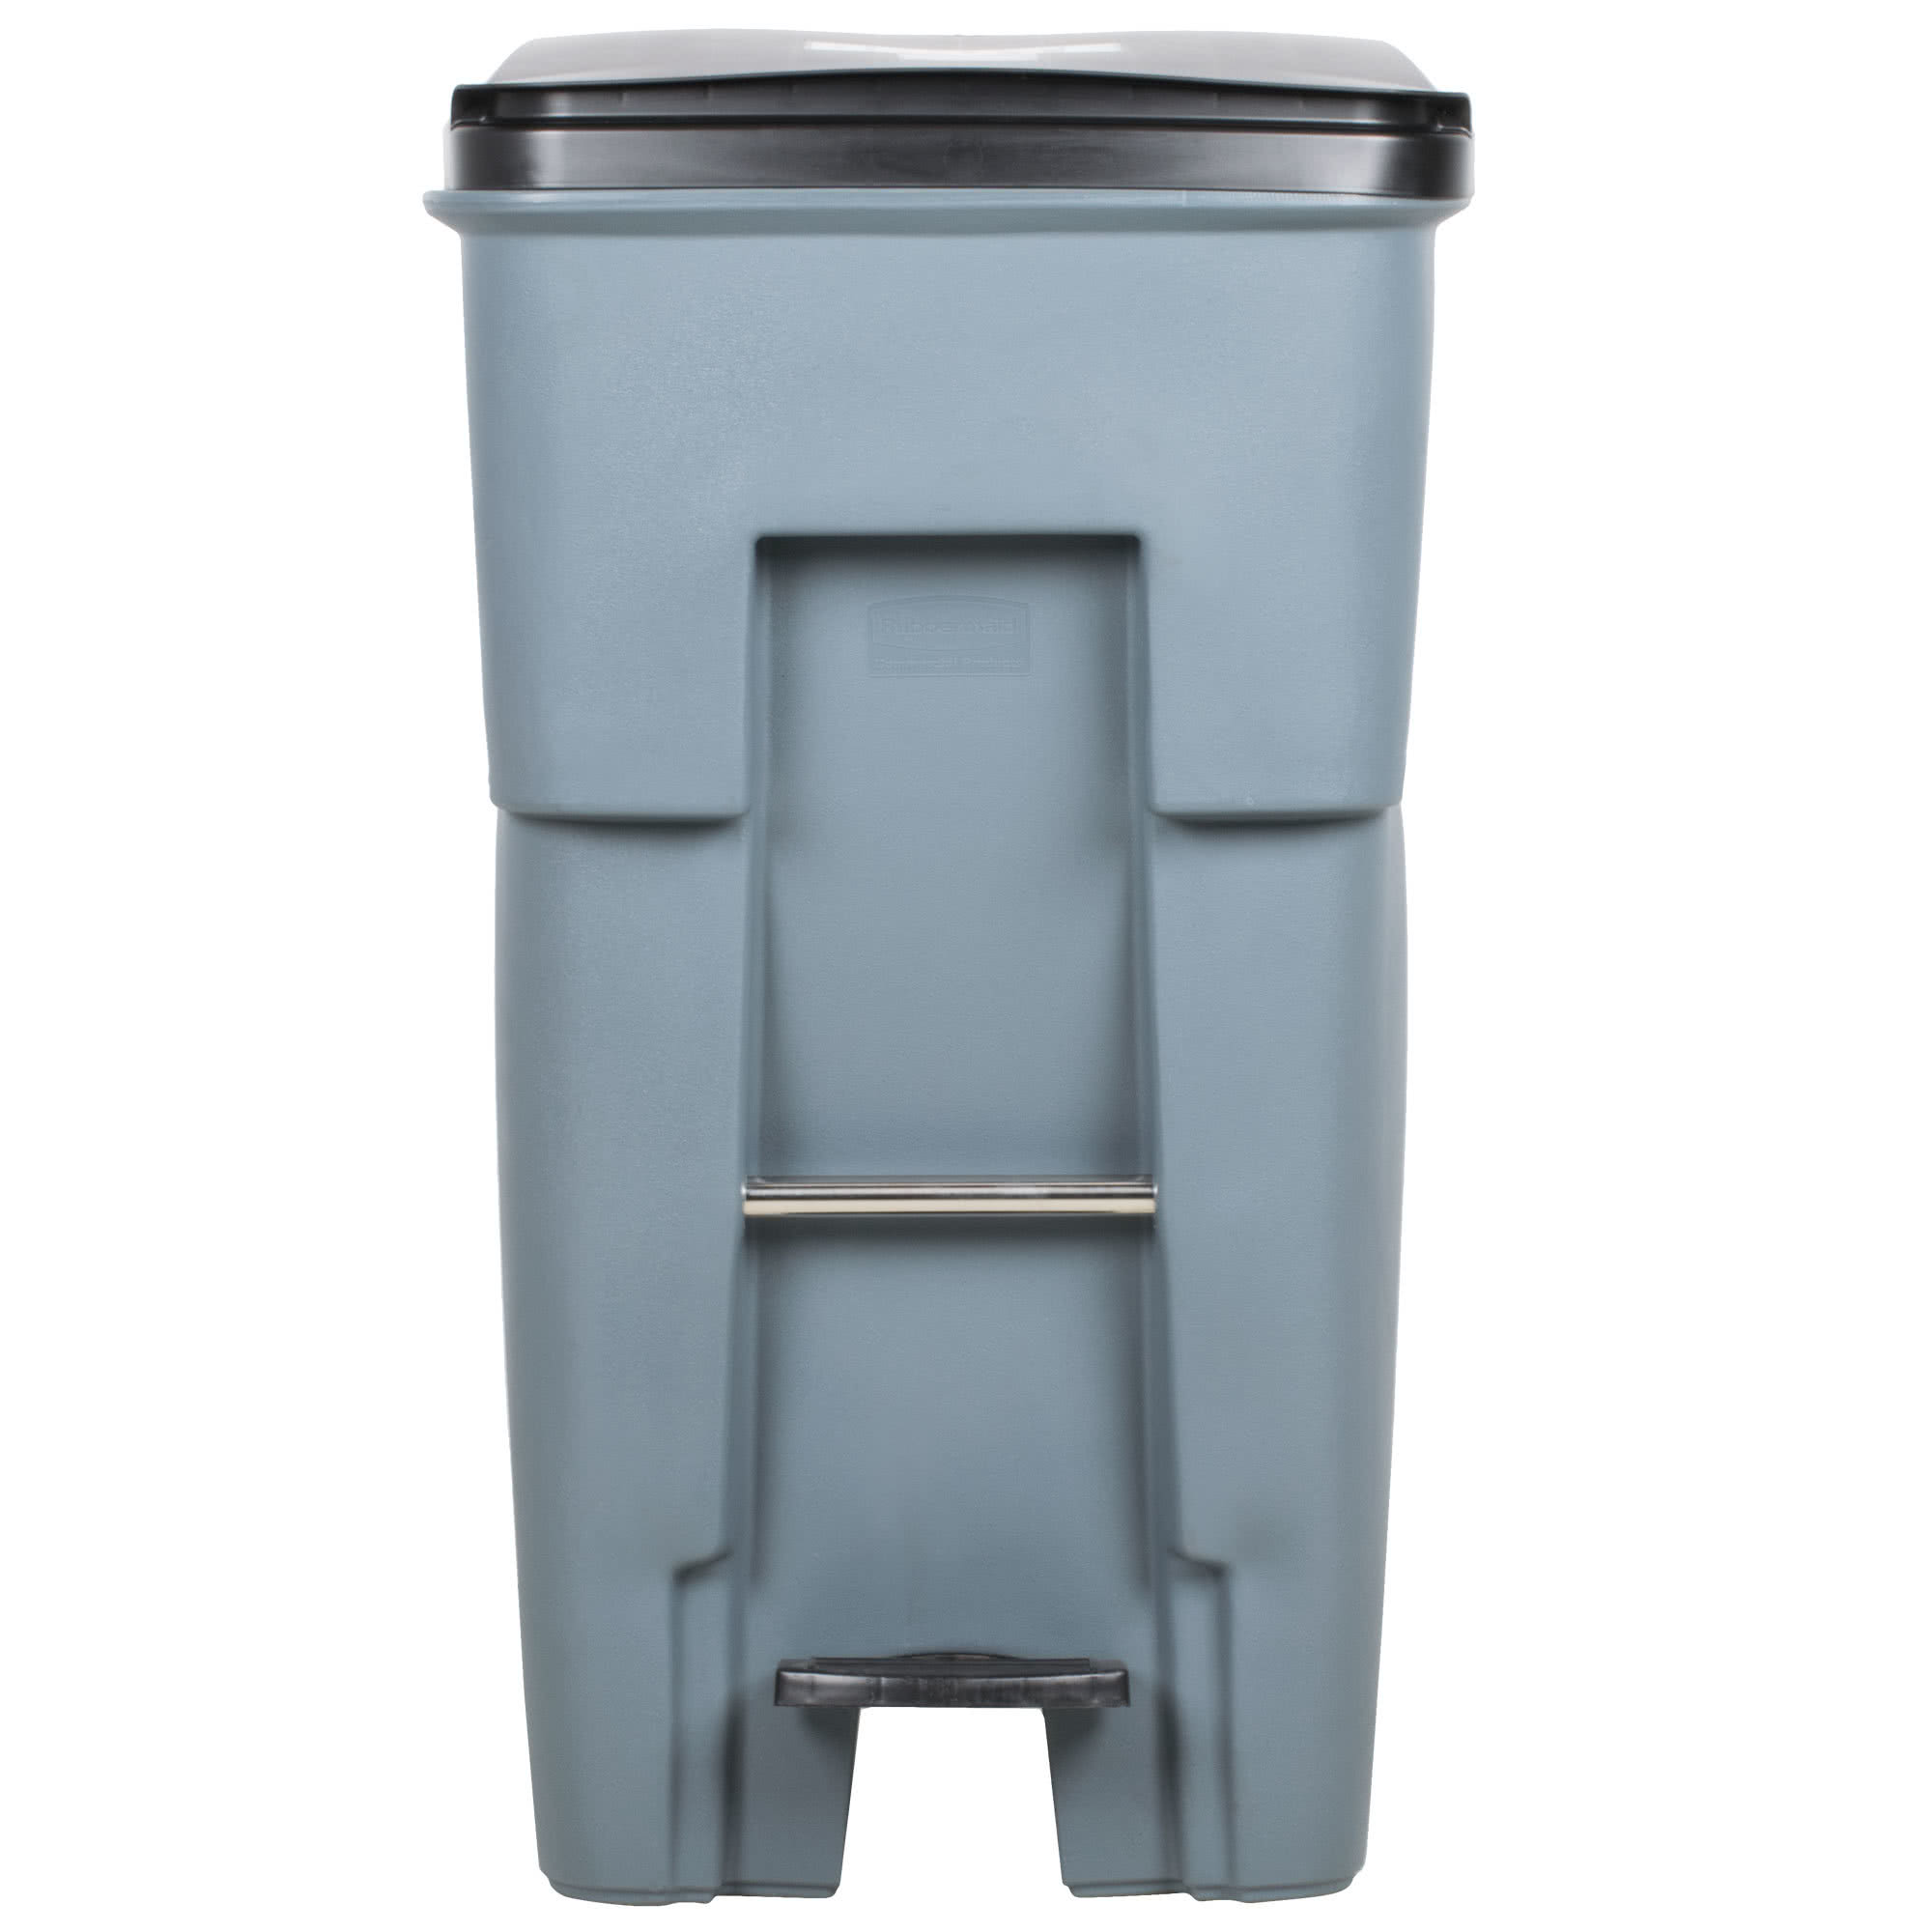 Rubbermaid 1971968 contenedor brute roll-out step-on con capacidad para 65 galones, color gris